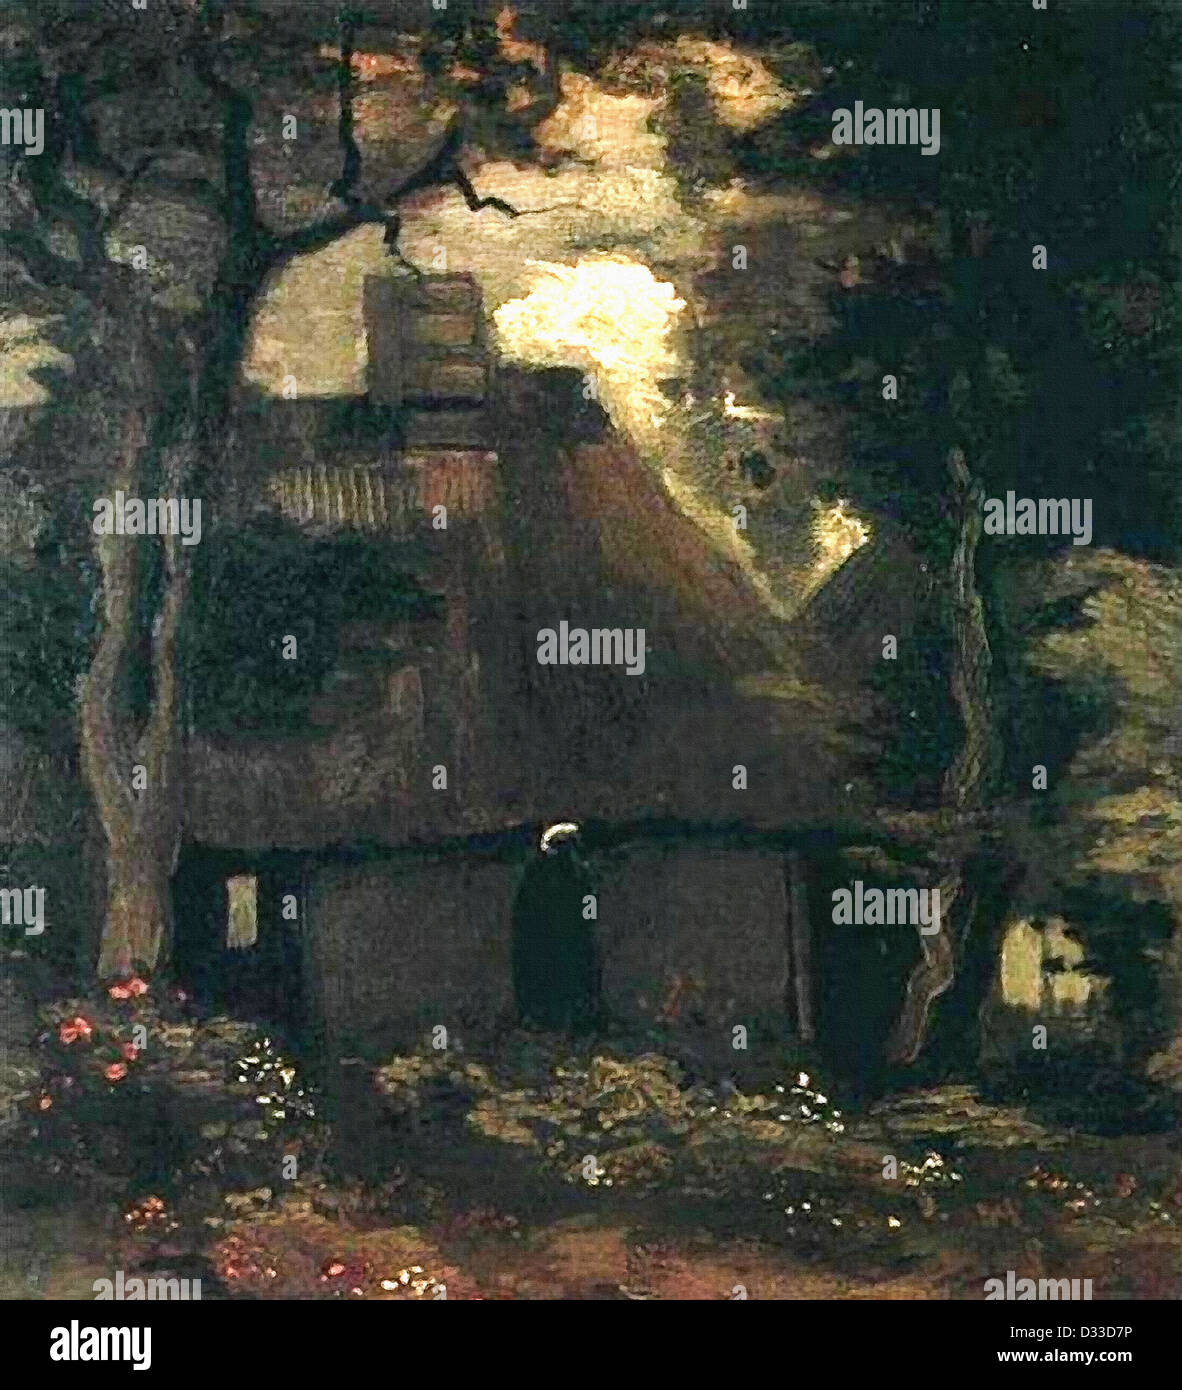 Vincent van Gogh: Cottage with Trees. 1885. Oil on canvas. Wallraf-Richartz Museum, Cologne, Germany. Realism. Stock Photo